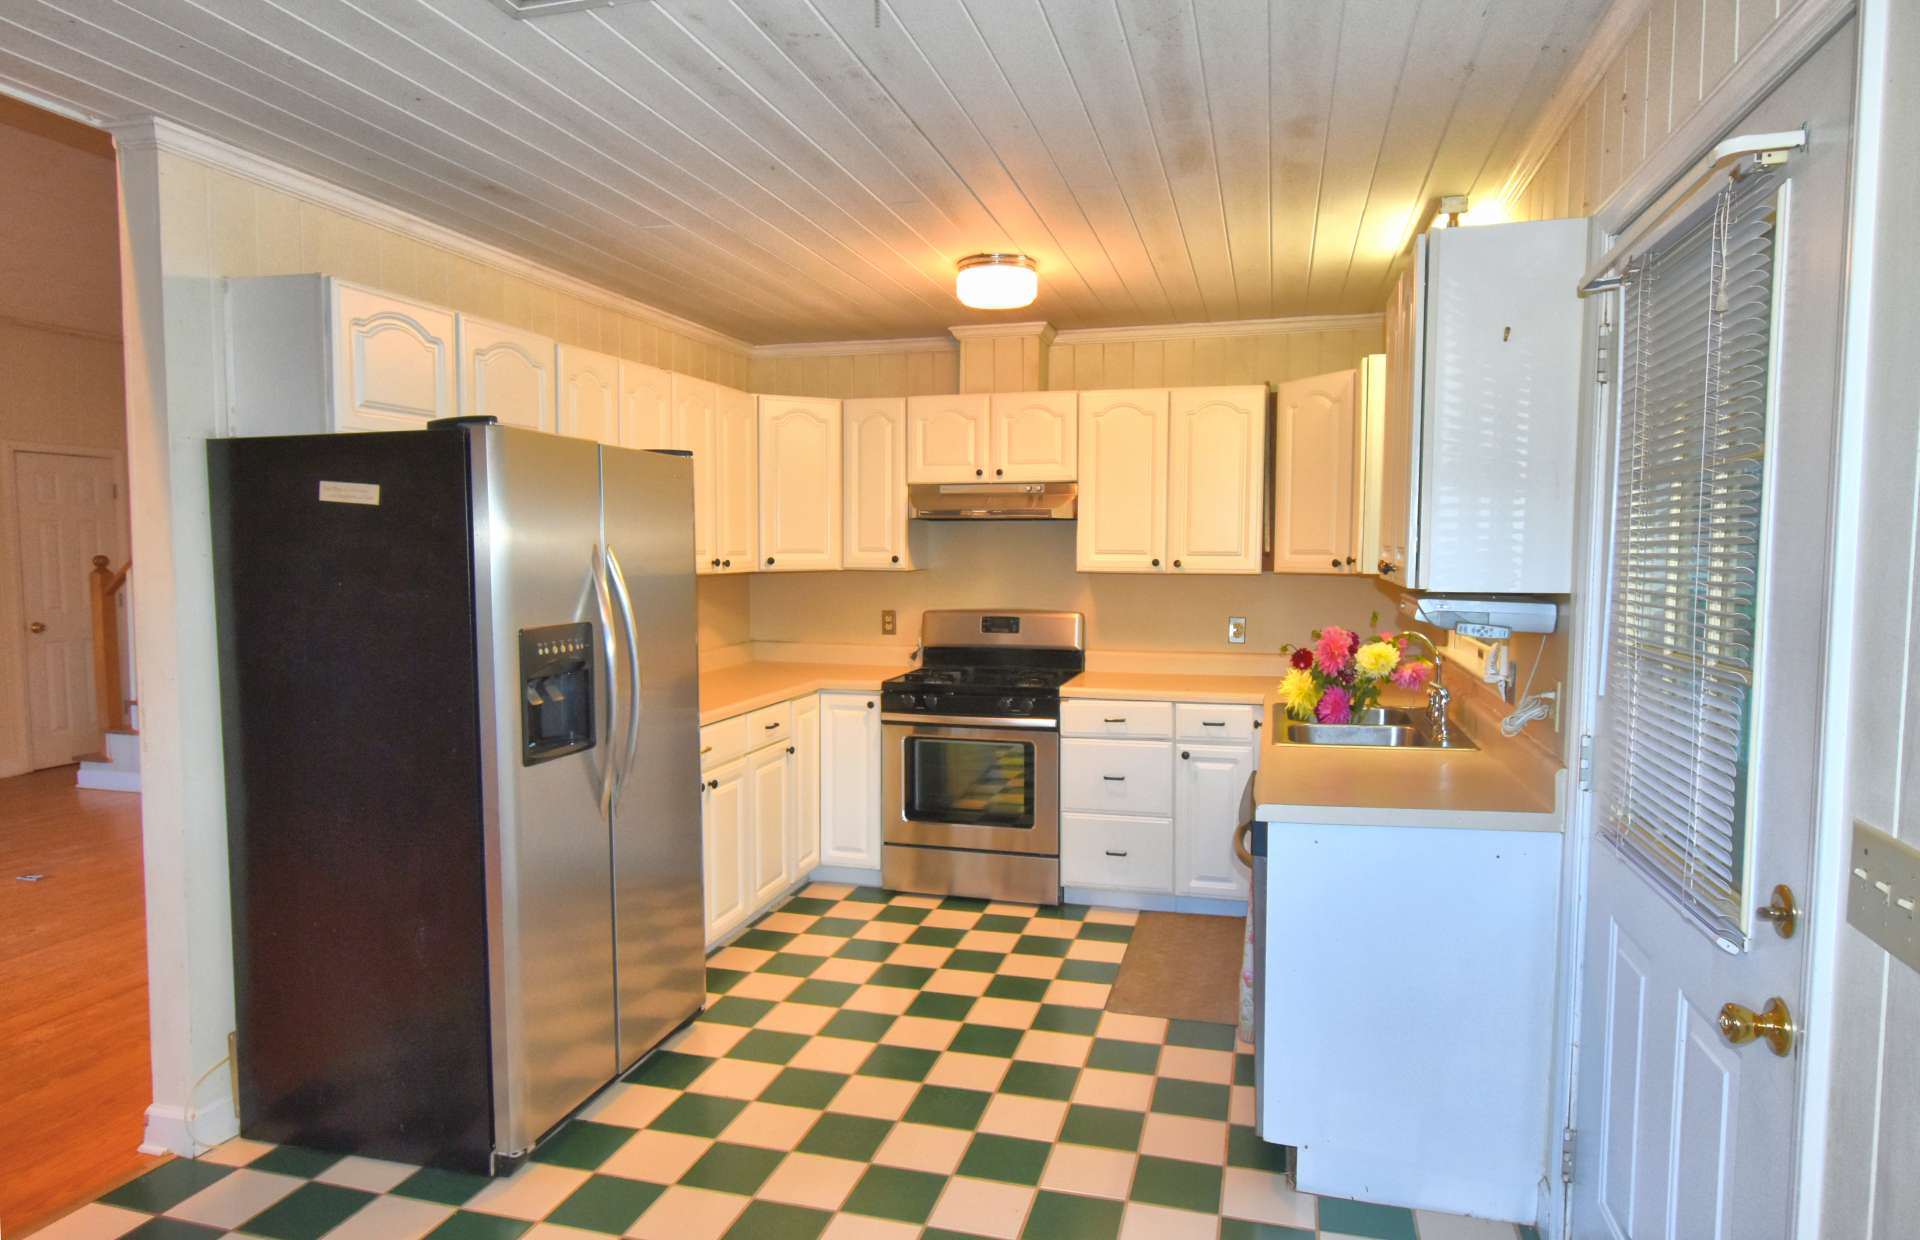 The efficient farm style kitchen offers ample work and storage space along stainless appliances that includes a gas range.